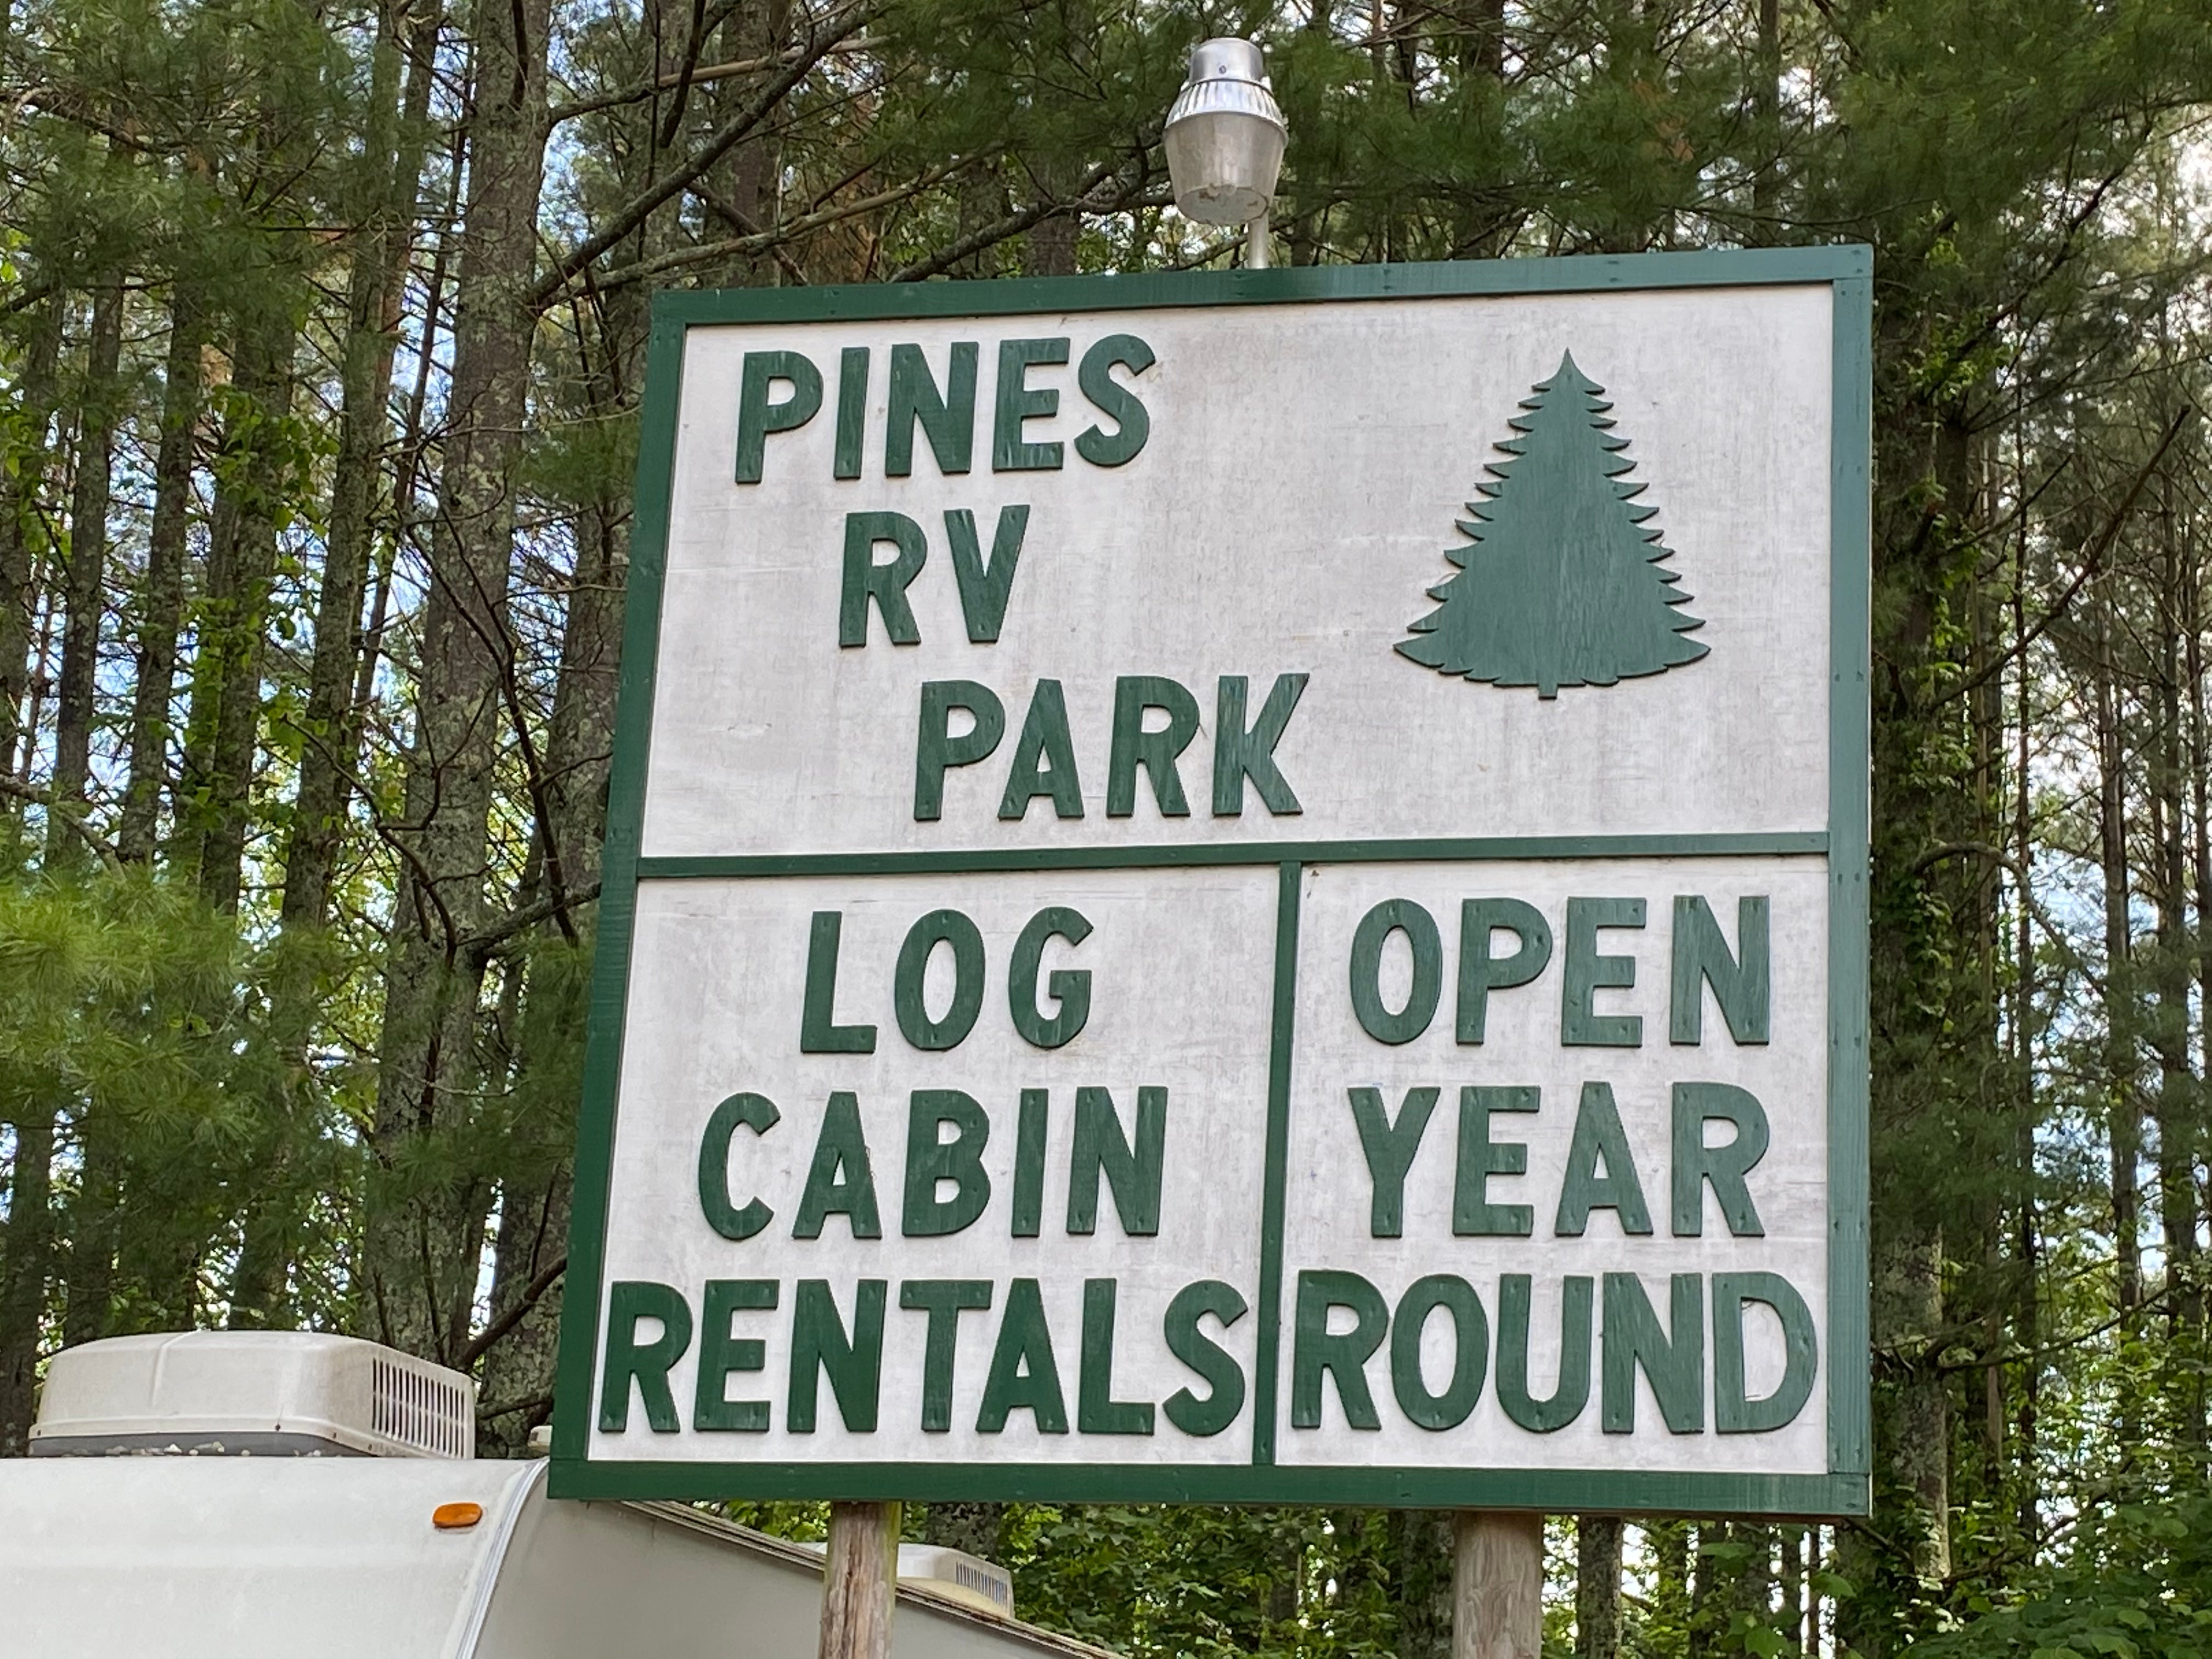 Camper submitted image from Pines RV Park and Cabins - 2